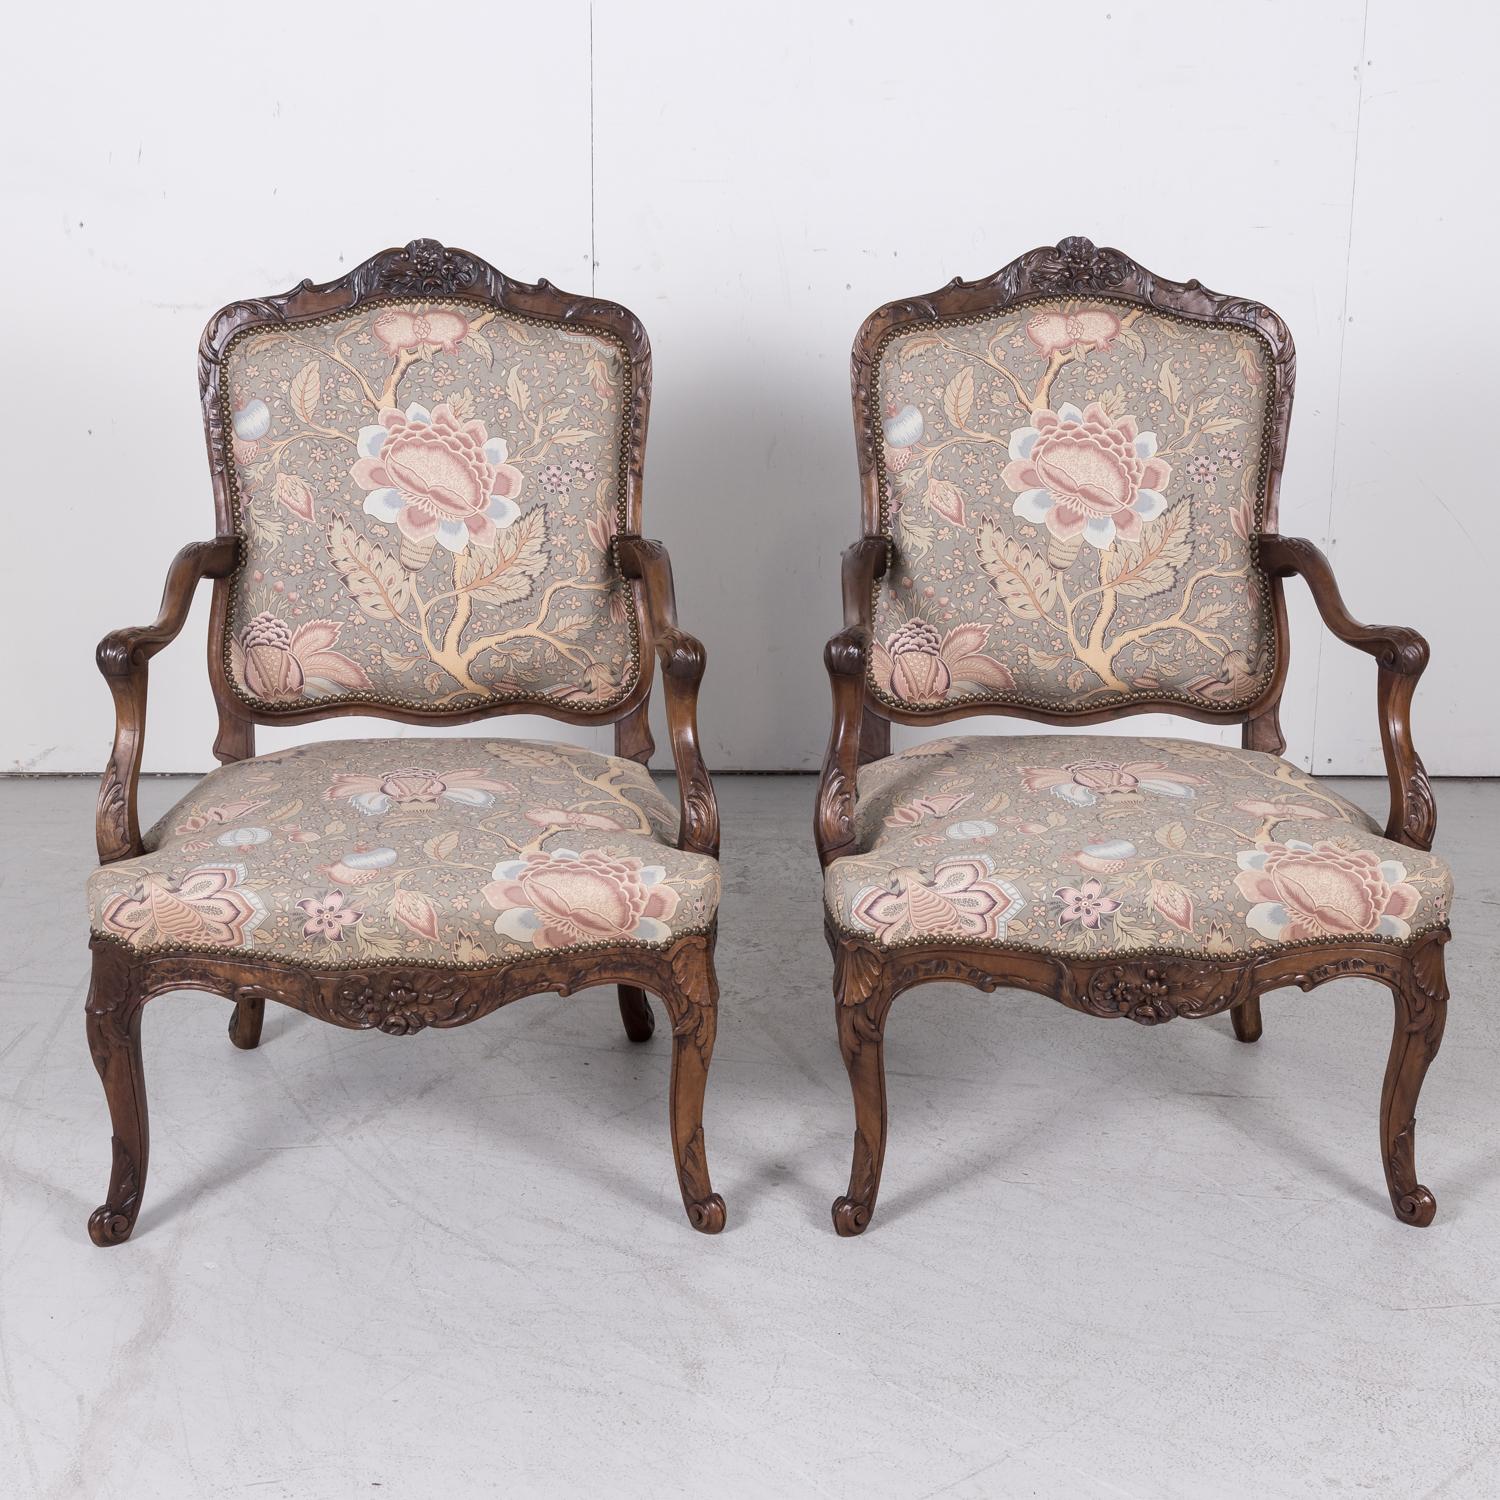 Fine Pair of 18th Century French Louis XV Period Carved Walnut Fauteuils For Sale 1